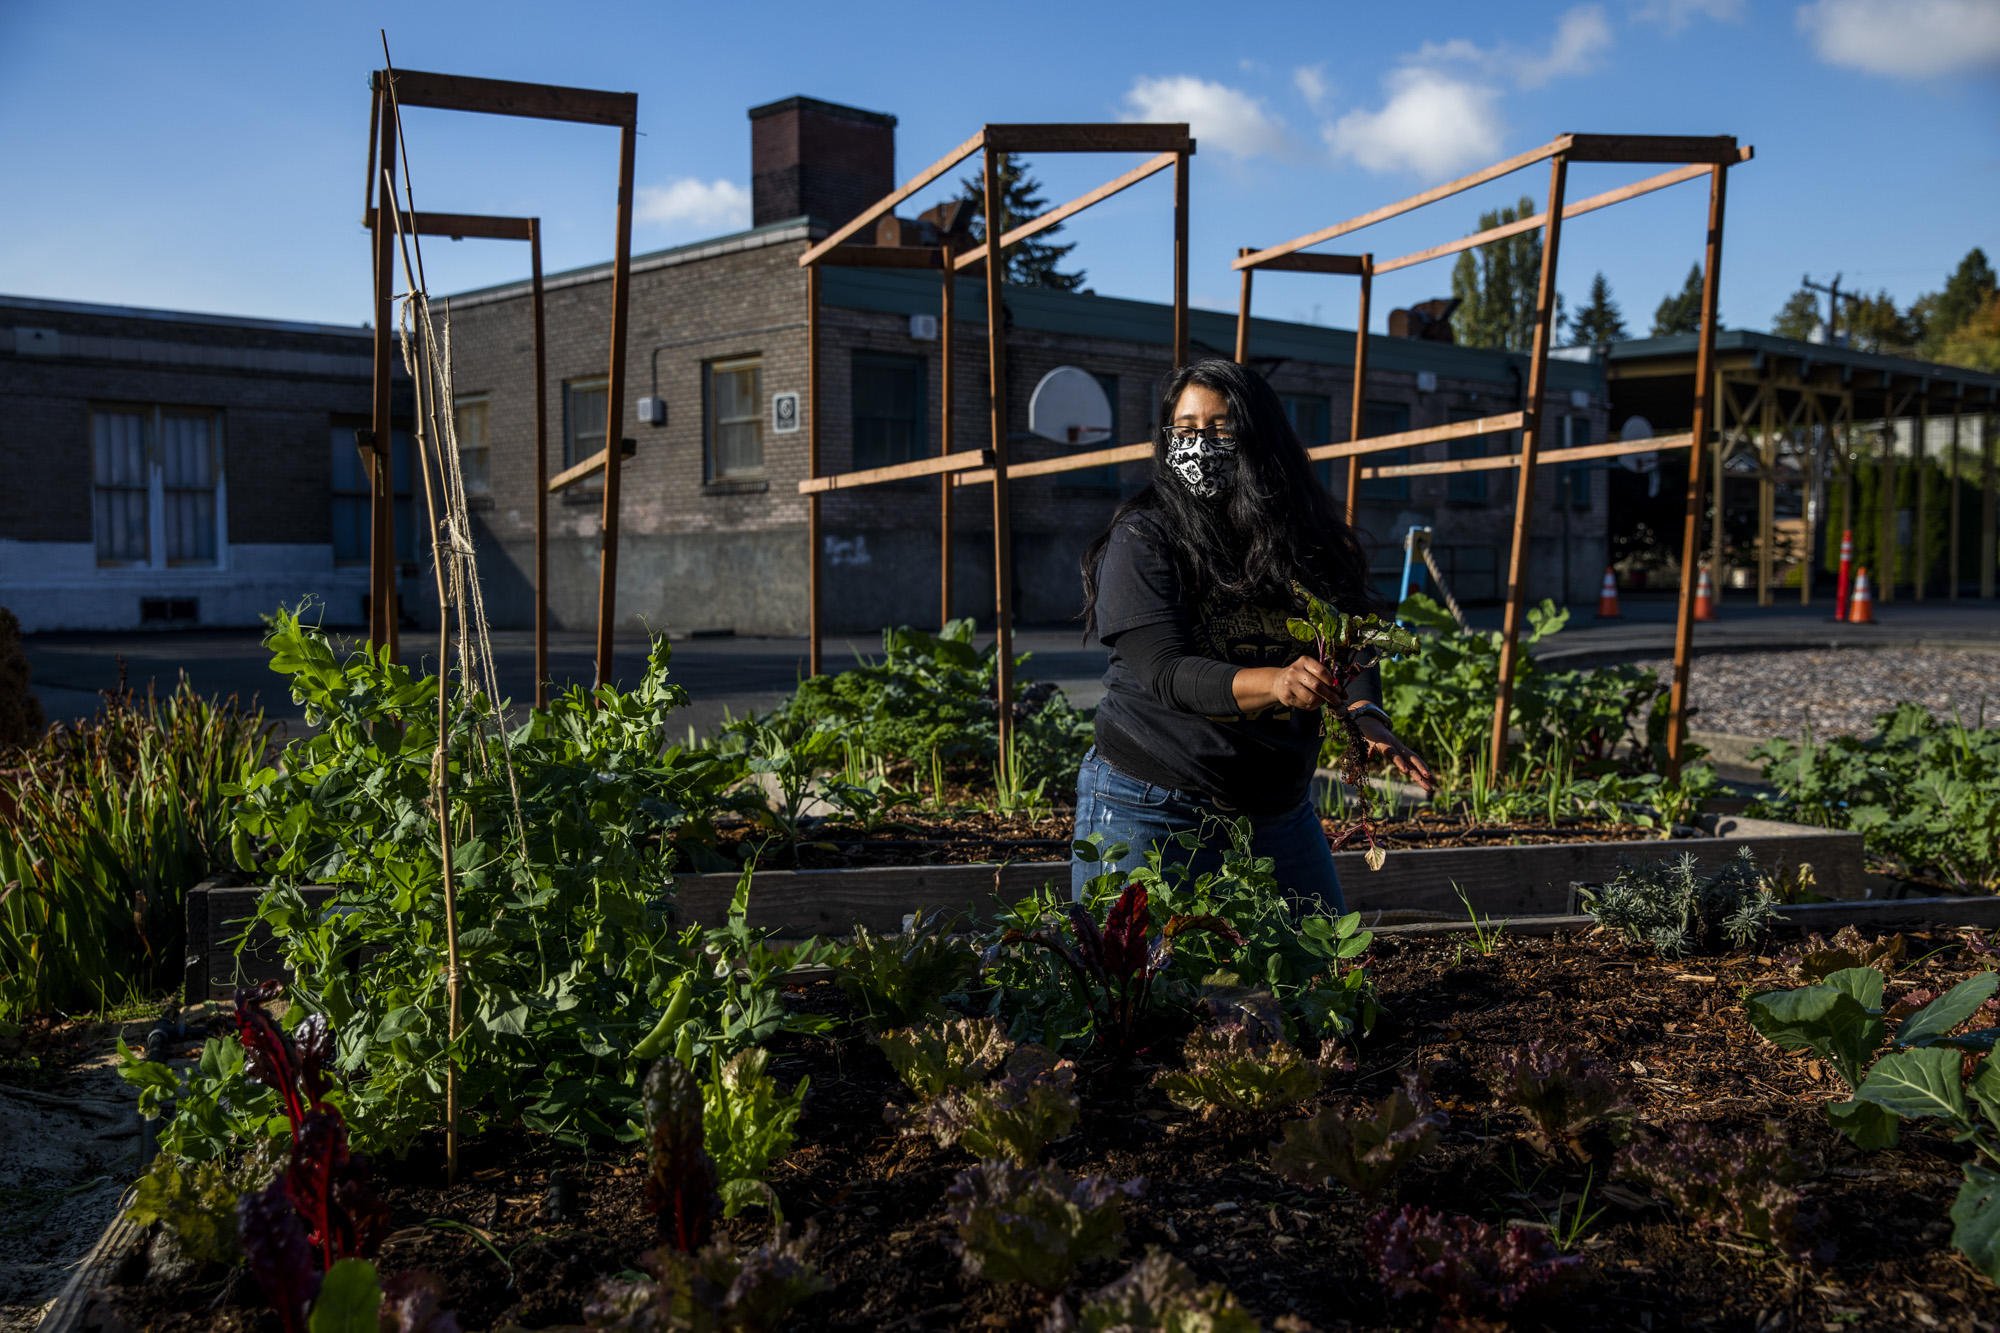 CHOP made urban gardening radical. The pandemic made it essential